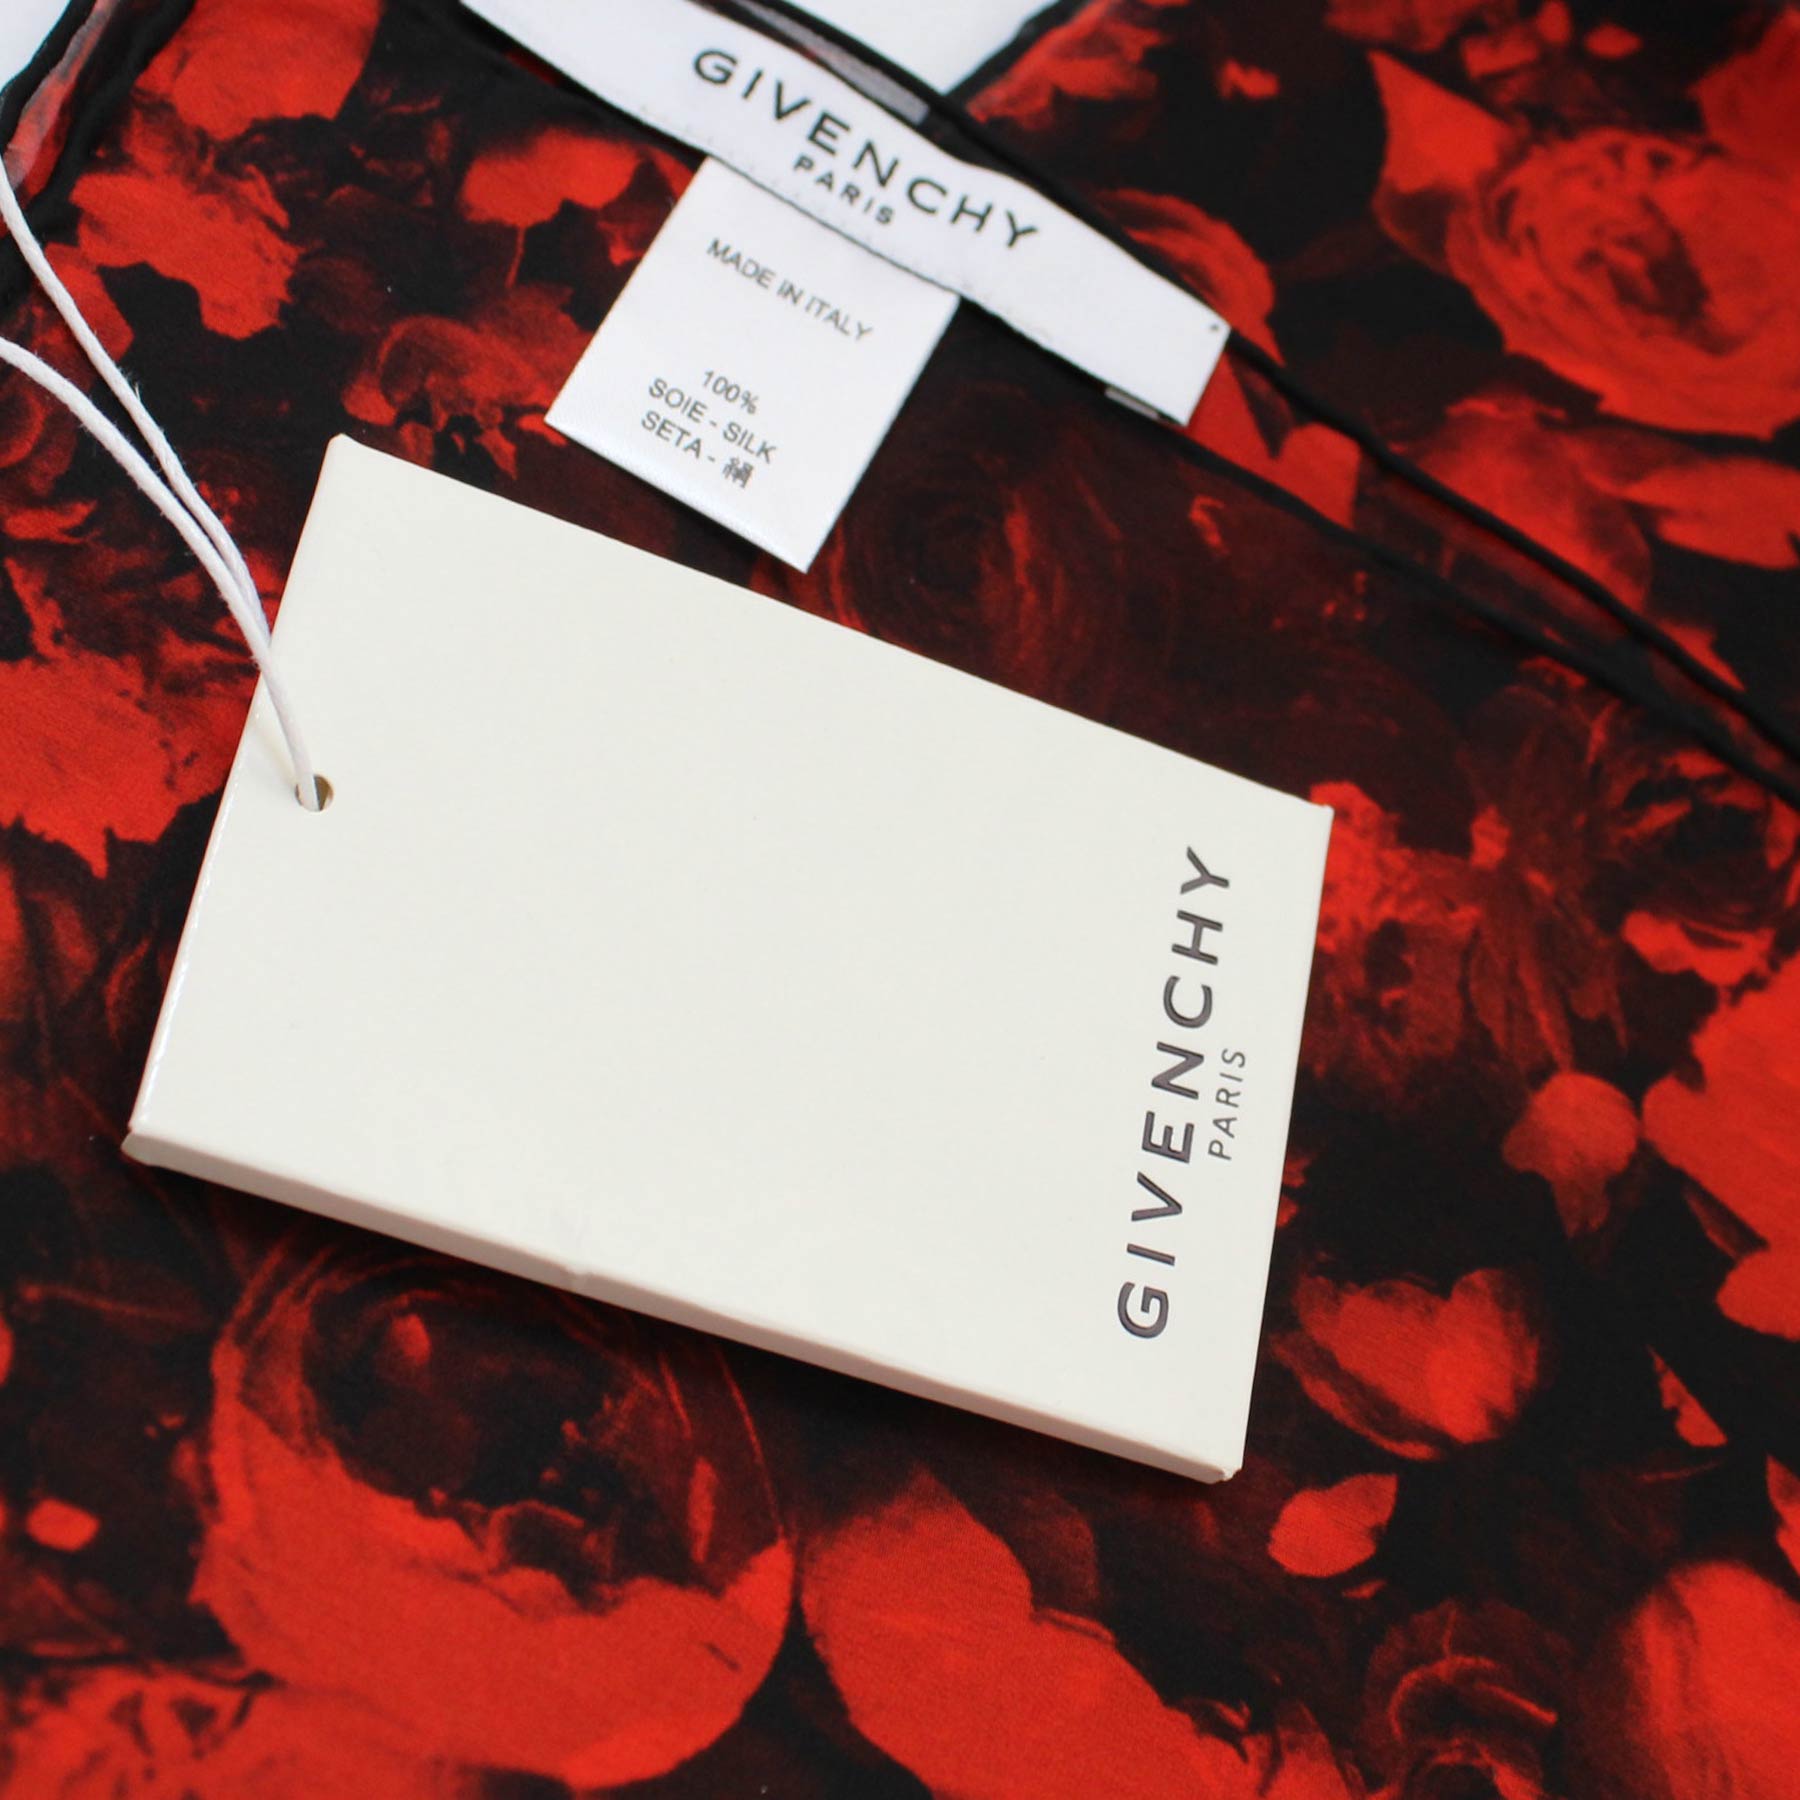 Givenchy Scarf Black Red Roses Large Chiffon Silk Square Wrap